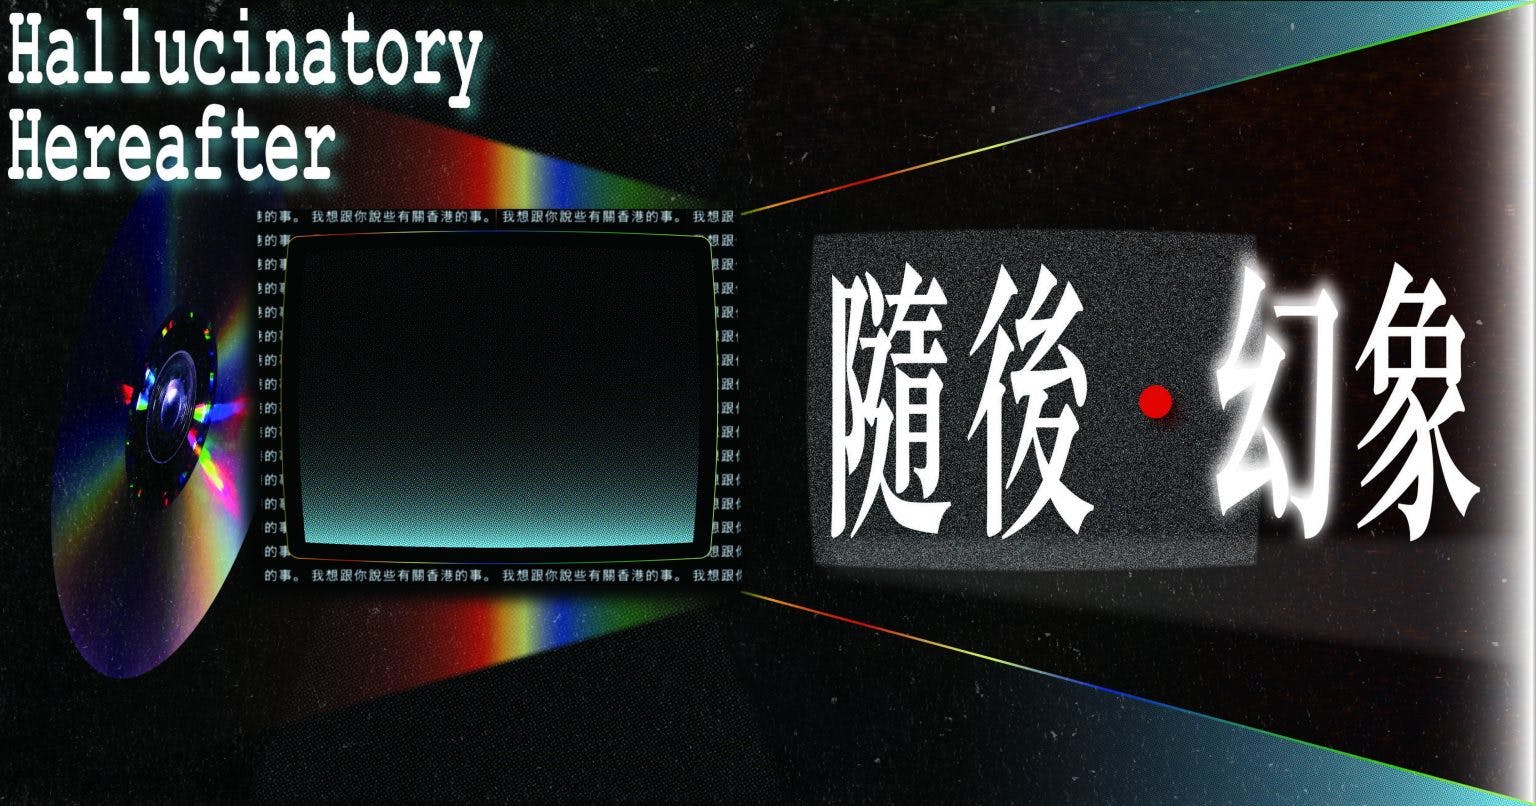 Hallucinatory Hereafter - Guest Programme@M+ Mediatheque 隨後．幻象@M+多媒體中心